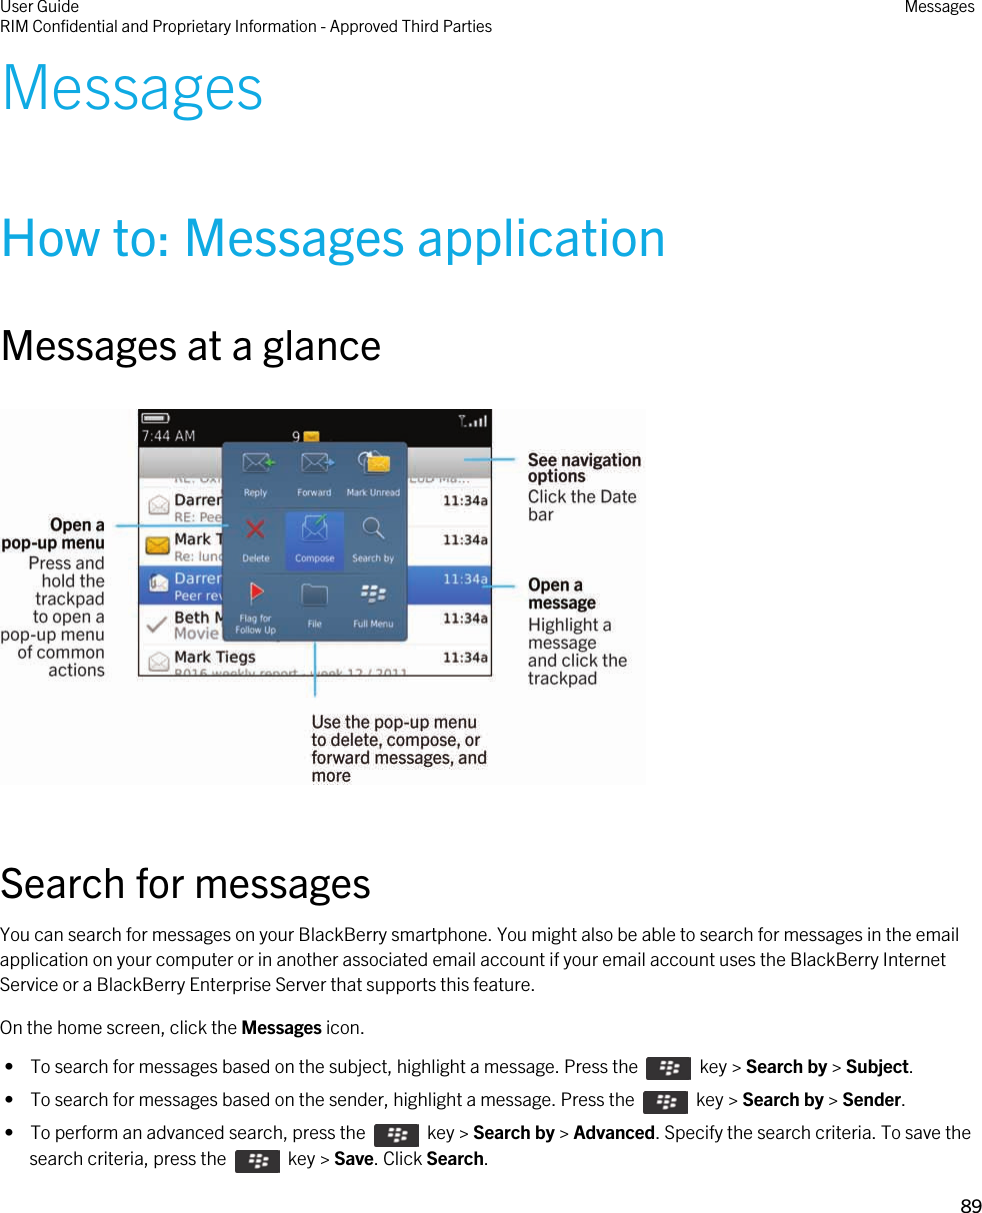 MessagesHow to: Messages applicationMessages at a glance  Search for messagesYou can search for messages on your BlackBerry smartphone. You might also be able to search for messages in the email application on your computer or in another associated email account if your email account uses the BlackBerry Internet Service or a BlackBerry Enterprise Server that supports this feature.On the home screen, click the Messages icon. •  To search for messages based on the subject, highlight a message. Press the    key &gt; Search by &gt; Subject. •  To search for messages based on the sender, highlight a message. Press the    key &gt; Search by &gt; Sender. •  To perform an advanced search, press the    key &gt; Search by &gt; Advanced. Specify the search criteria. To save the search criteria, press the    key &gt; Save. Click Search.User GuideRIM Confidential and Proprietary Information - Approved Third Parties Messages89 